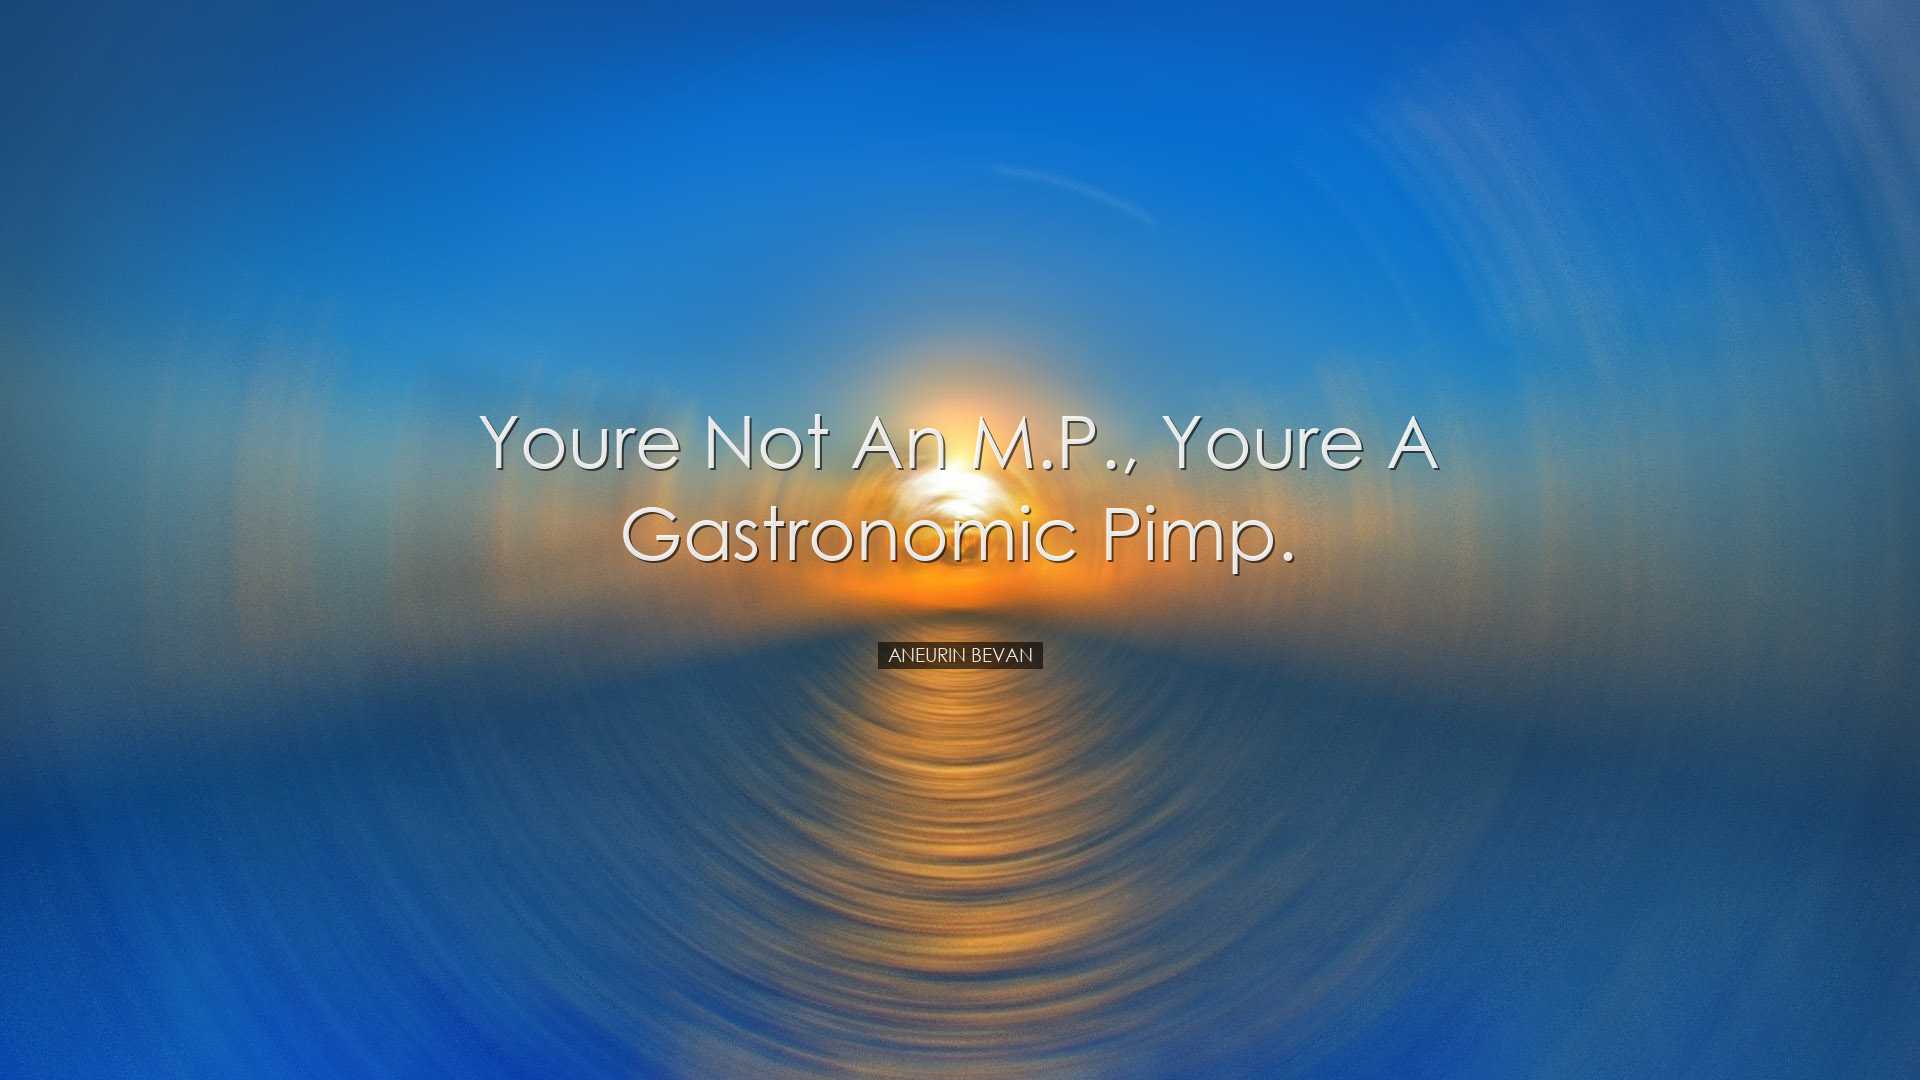 Youre not an M.P., youre a gastronomic pimp. - Aneurin Bevan